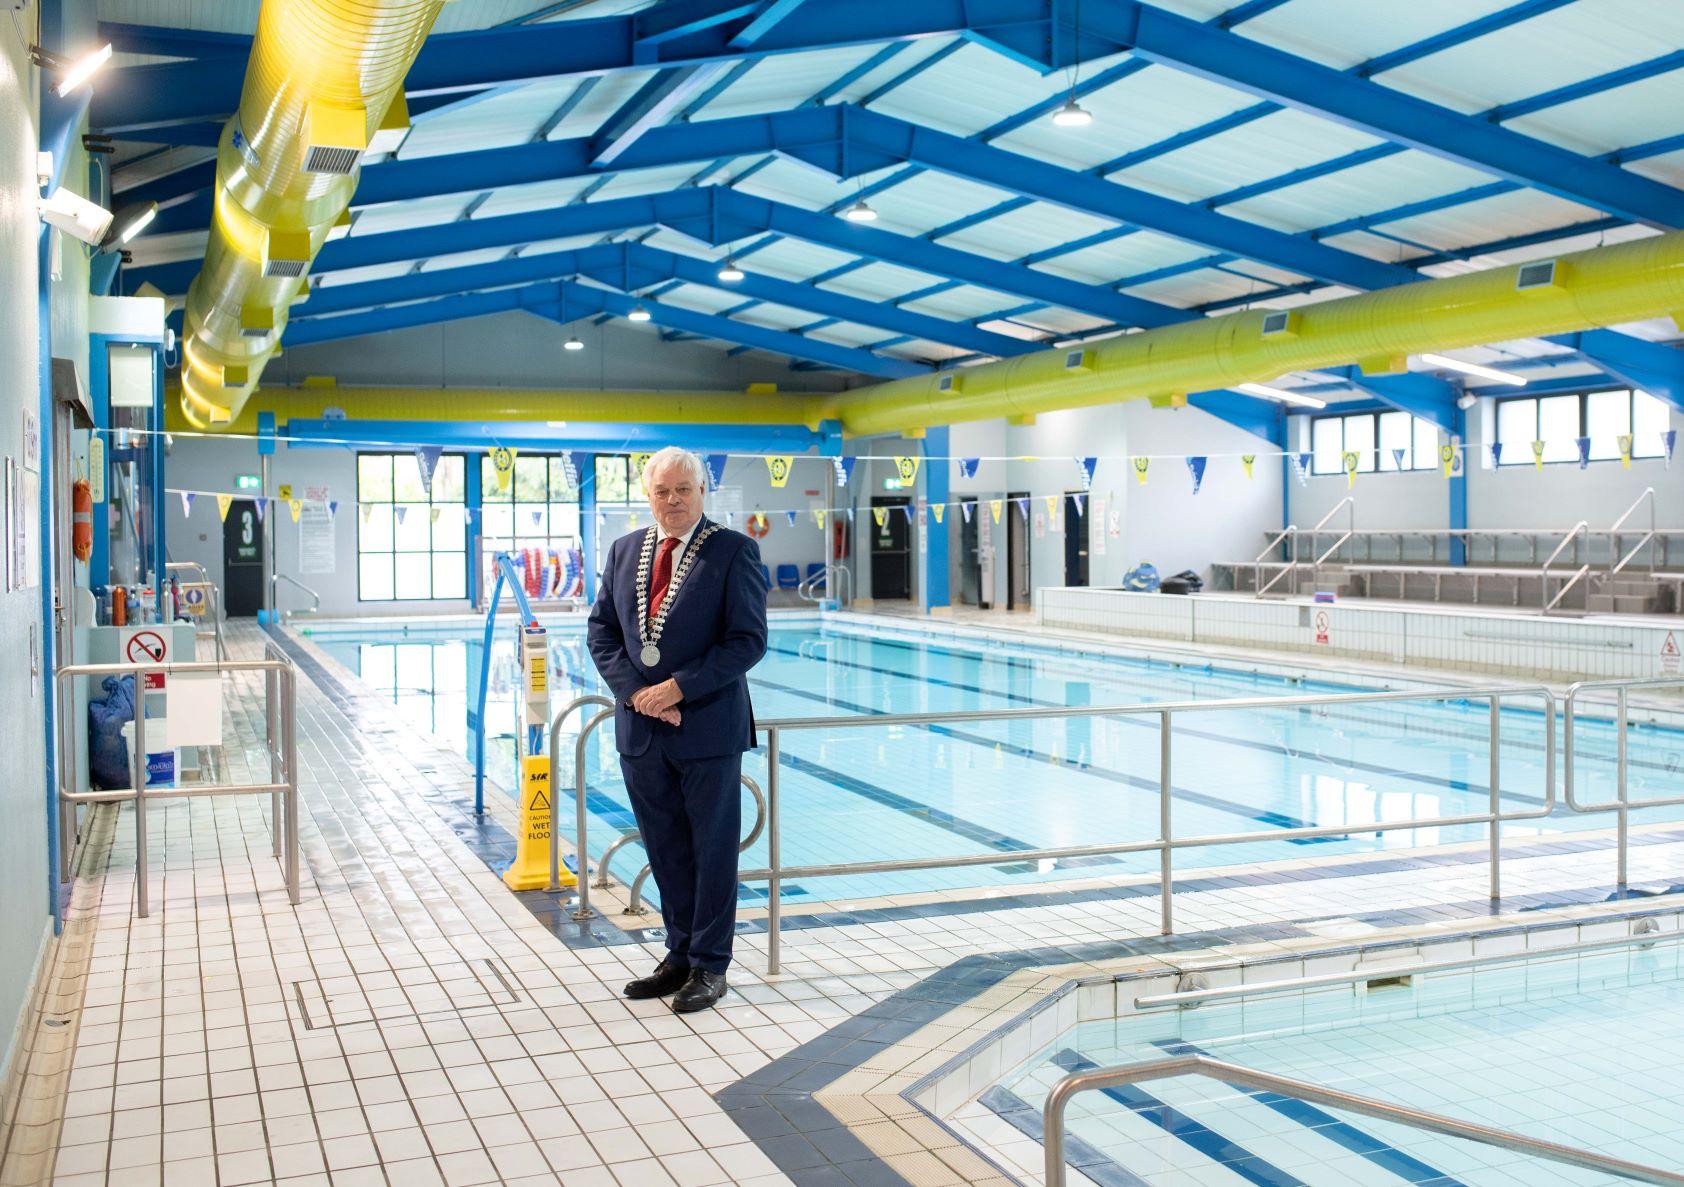 A man in a suit standing near a wimming pool